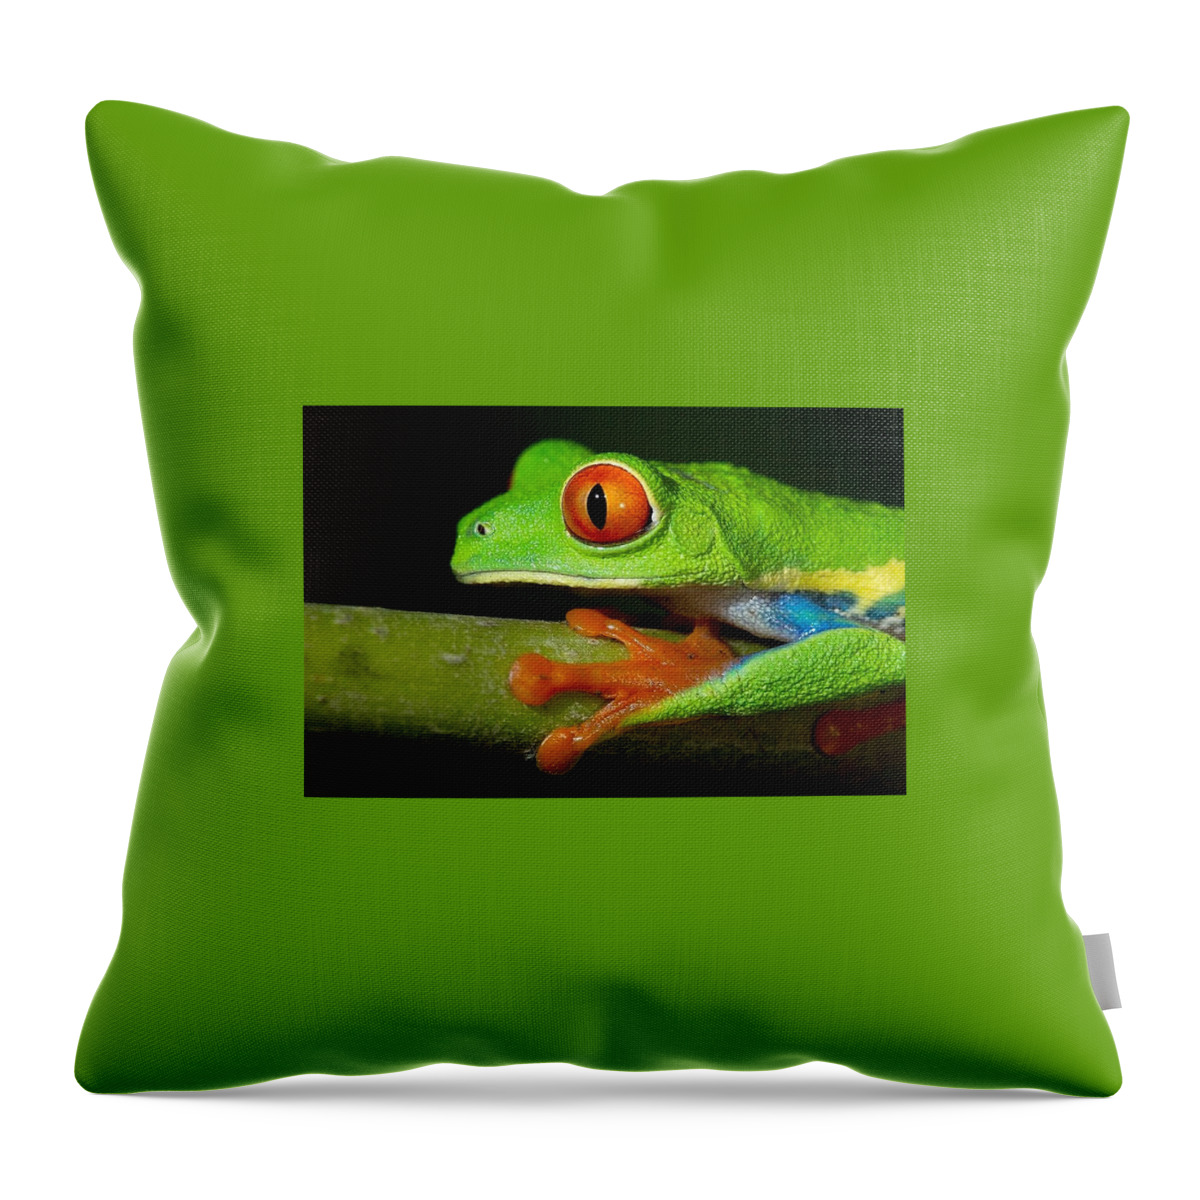 Red Eyed Tree Frog Throw Pillow featuring the digital art Red Eyed Tree Frog by Maye Loeser